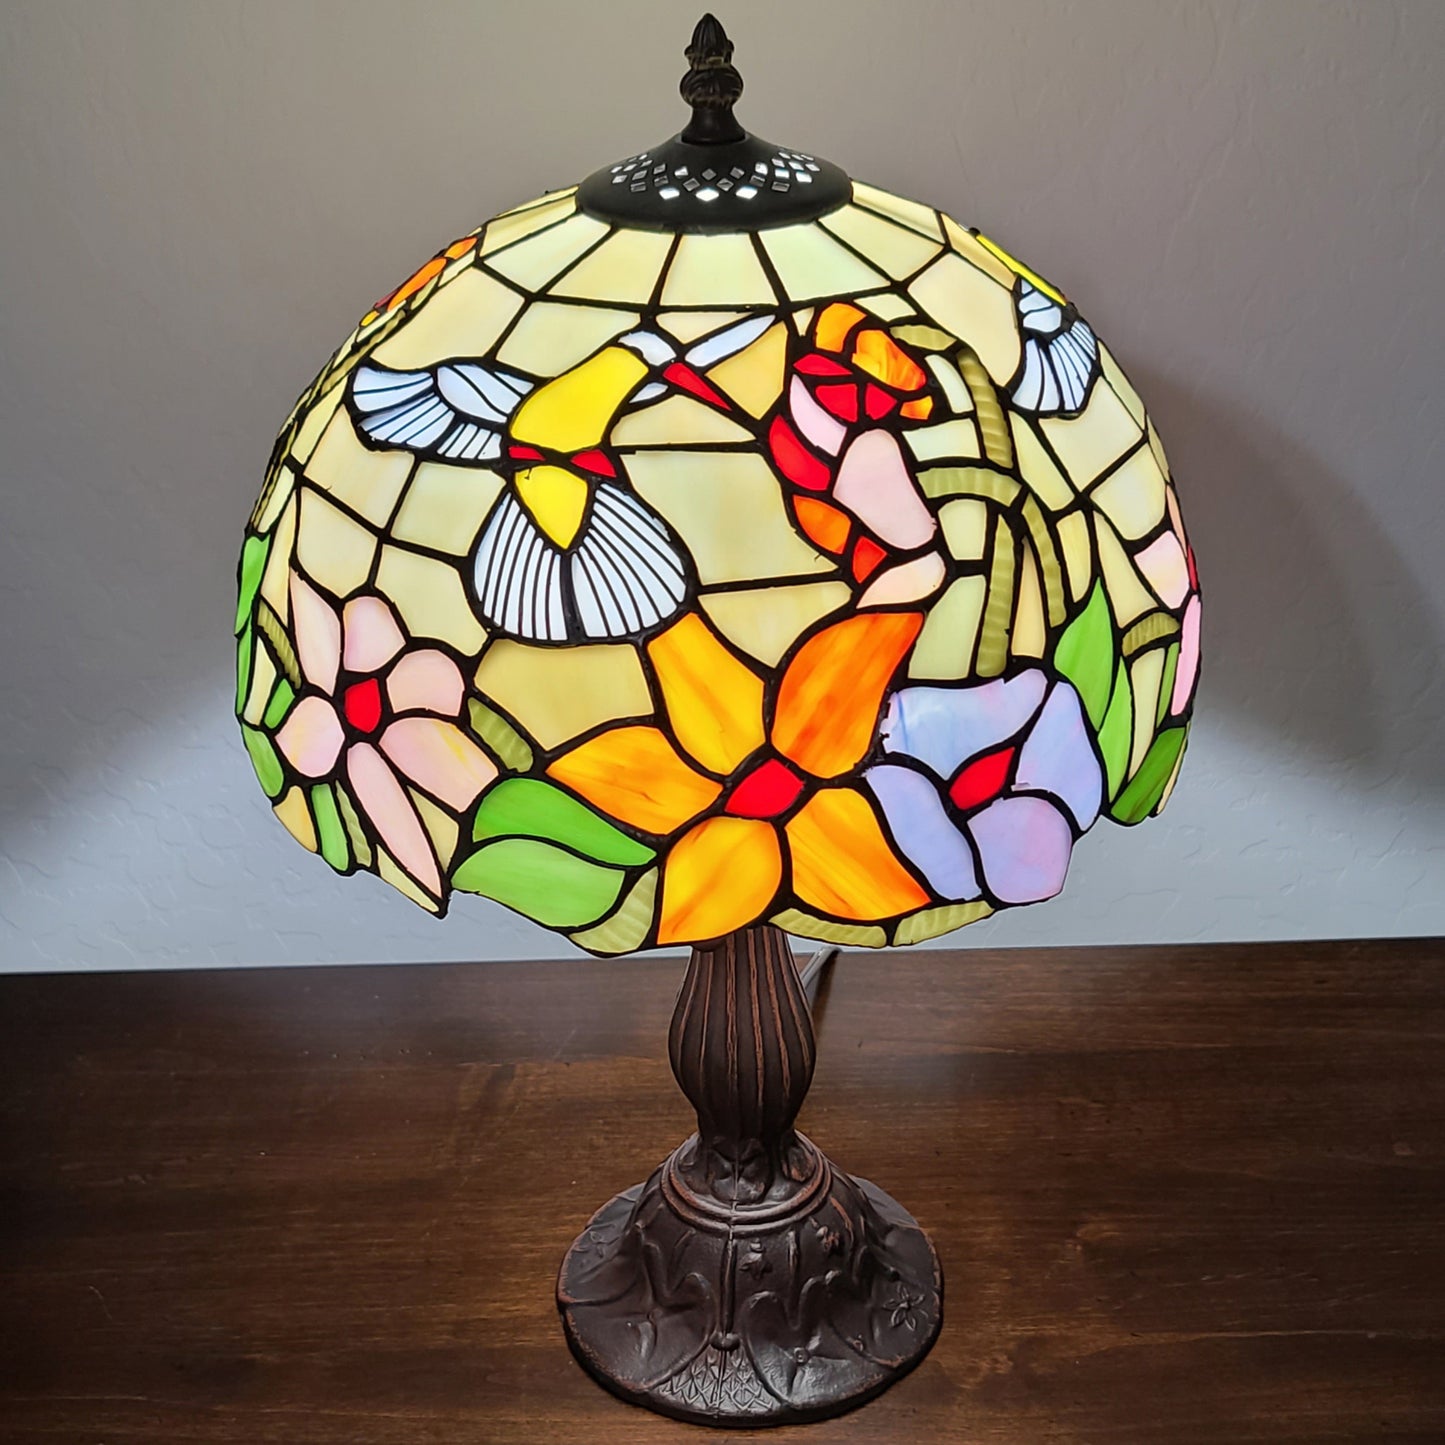 18" Tiffany Style Floral Table Lamp